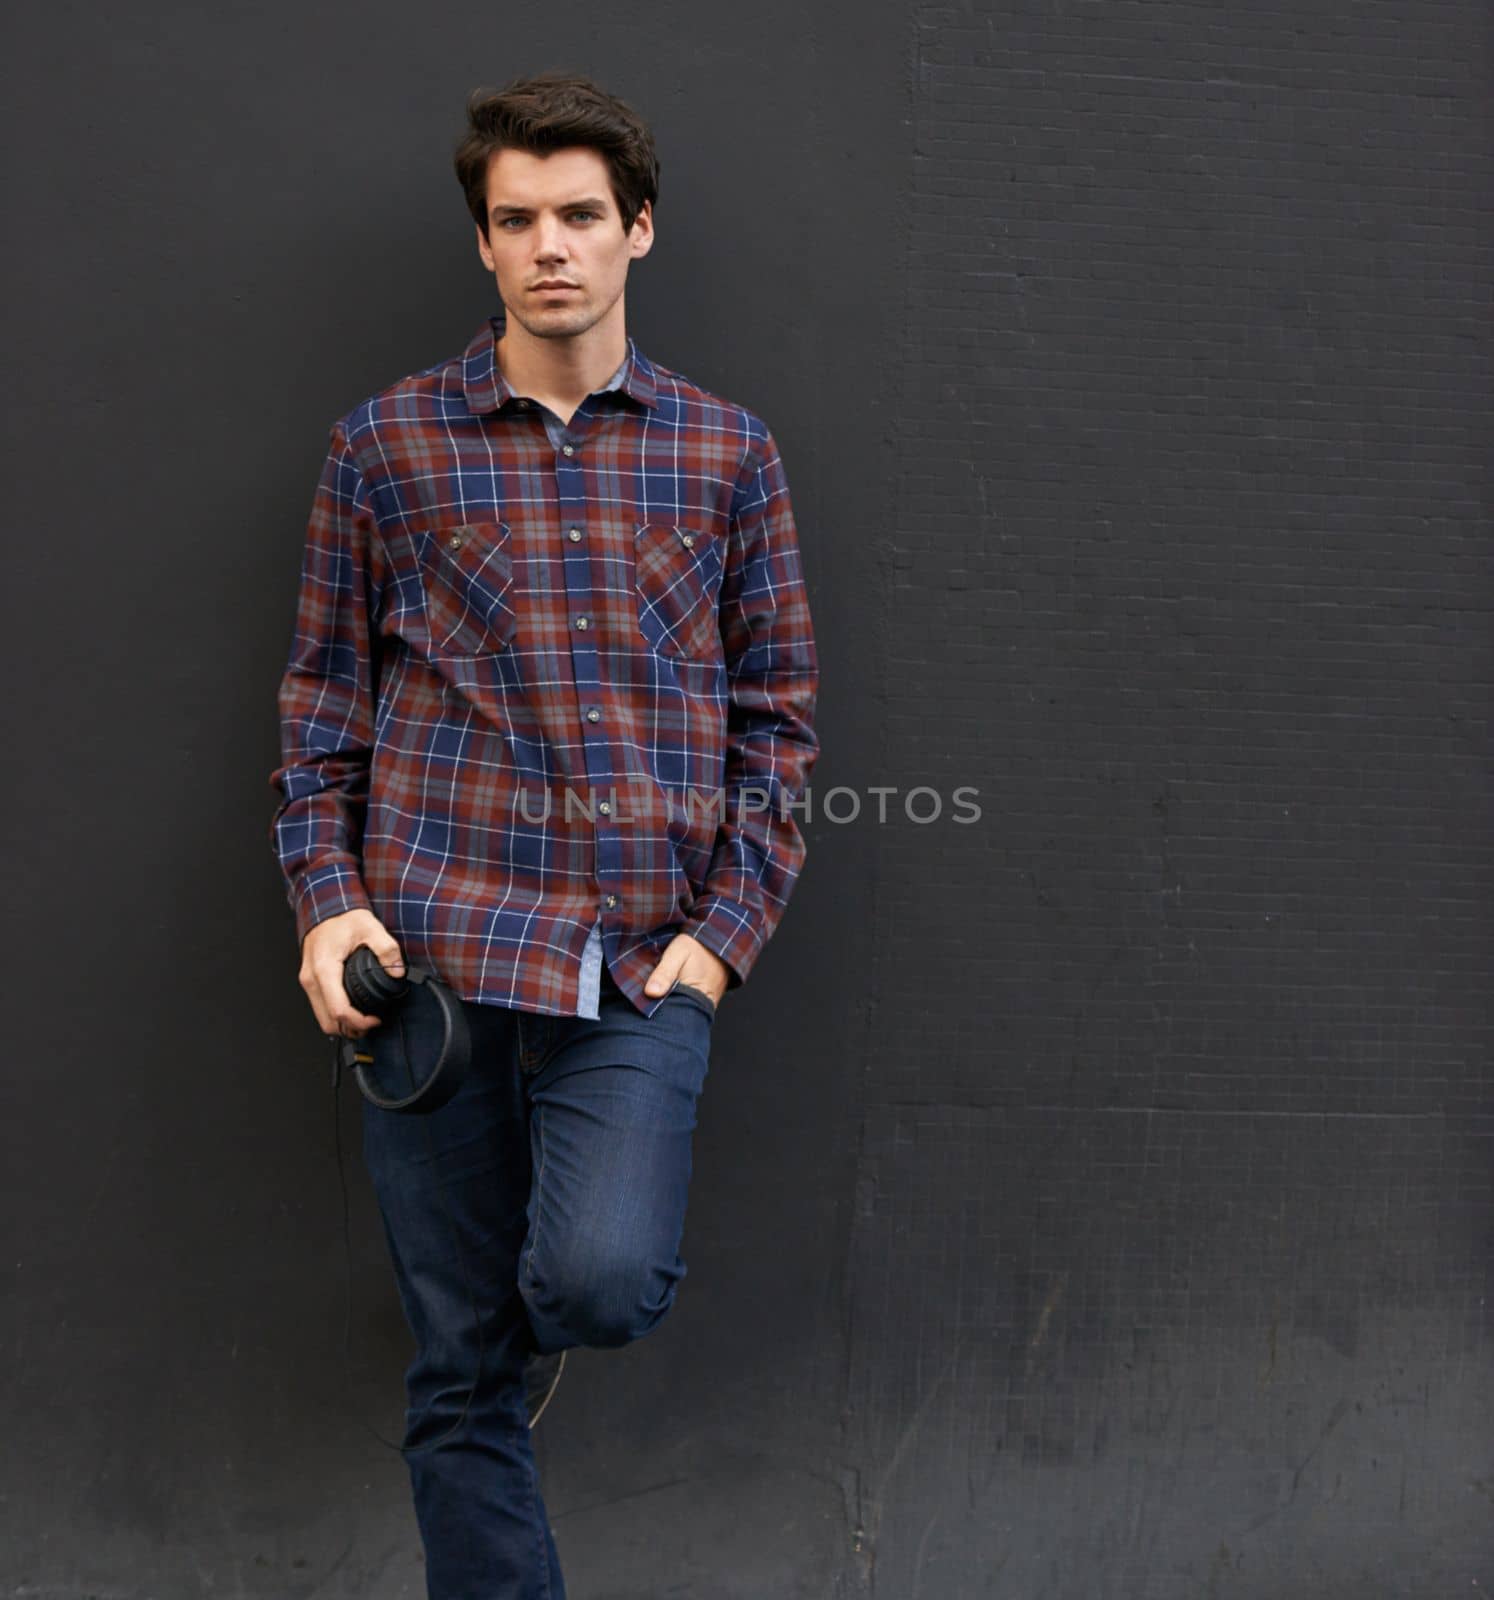 Laid back in plaid. a handsome young man standing outdoors with his earphones